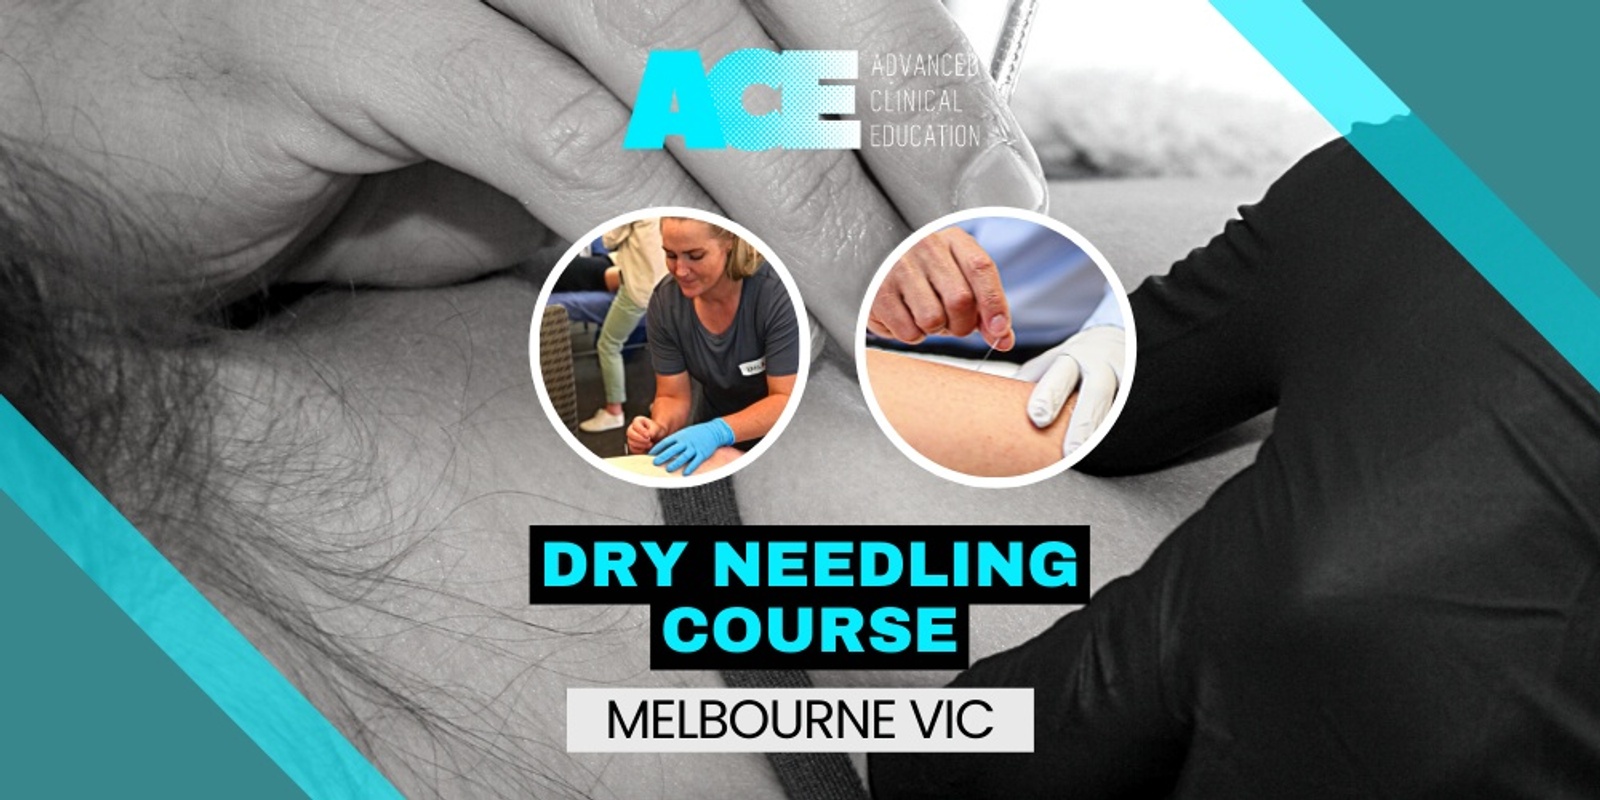 Dry Needling Course (Melbourne VIC)